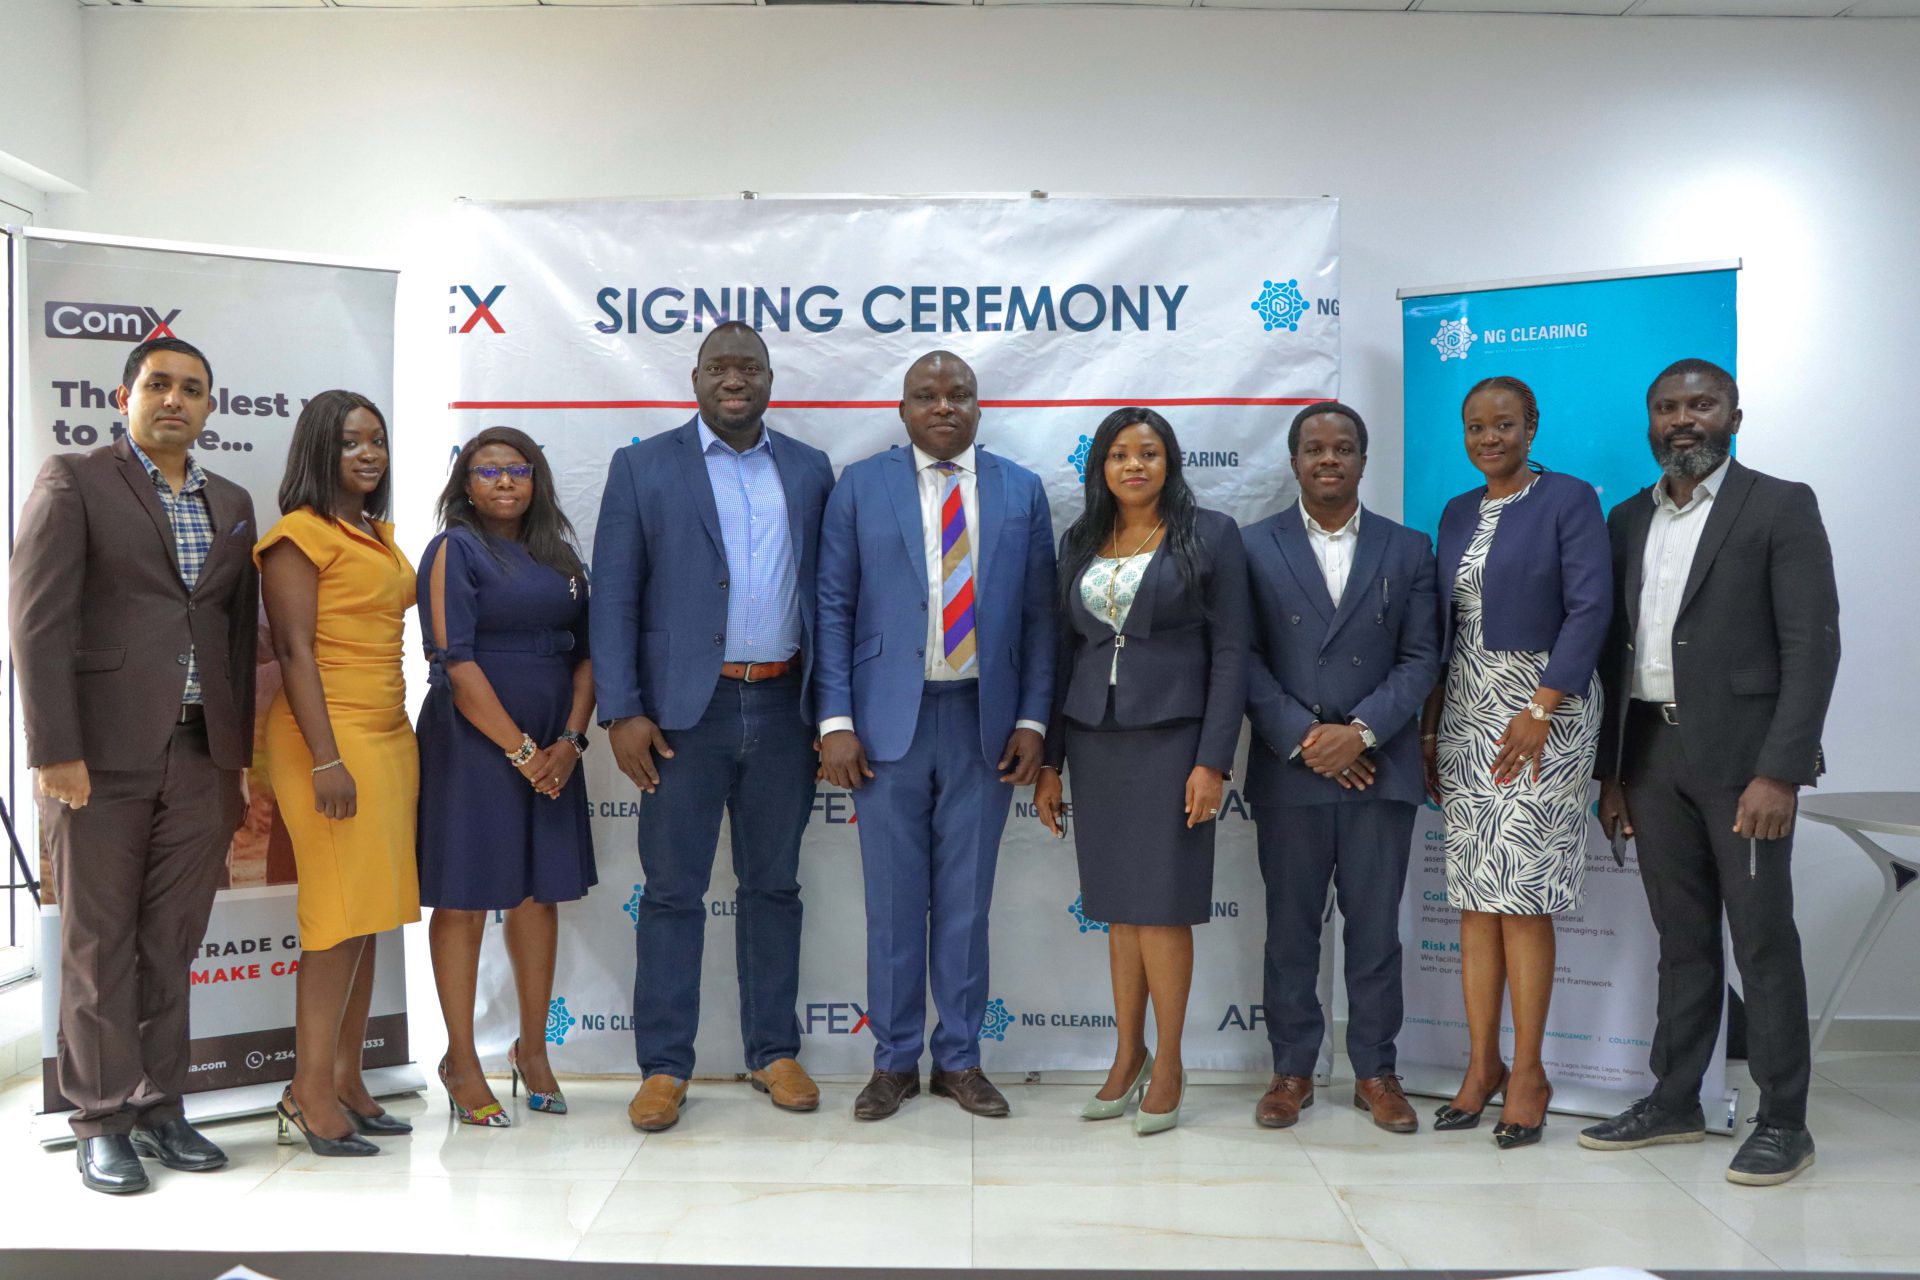 NG Clearing and AFEX signing ceremony for Commodity Derivatives